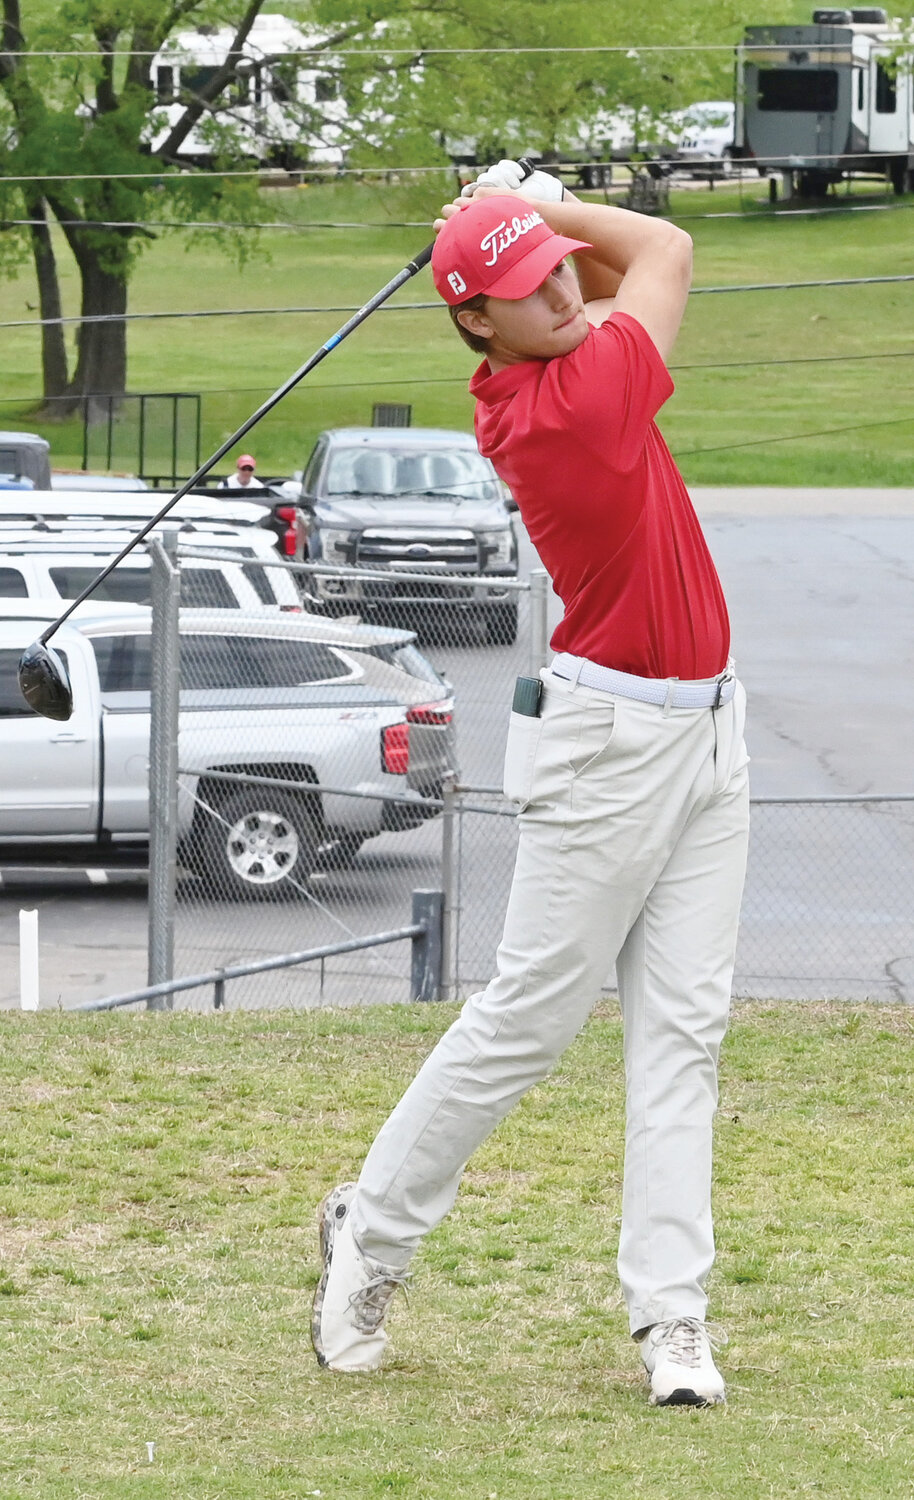 Purcell senior Brody Galyean tees off during the Regional golf tournament at Brent Bruehl Memorial Golf Course on Monday. Galyean shot 97-93 for a two-round total of 190.